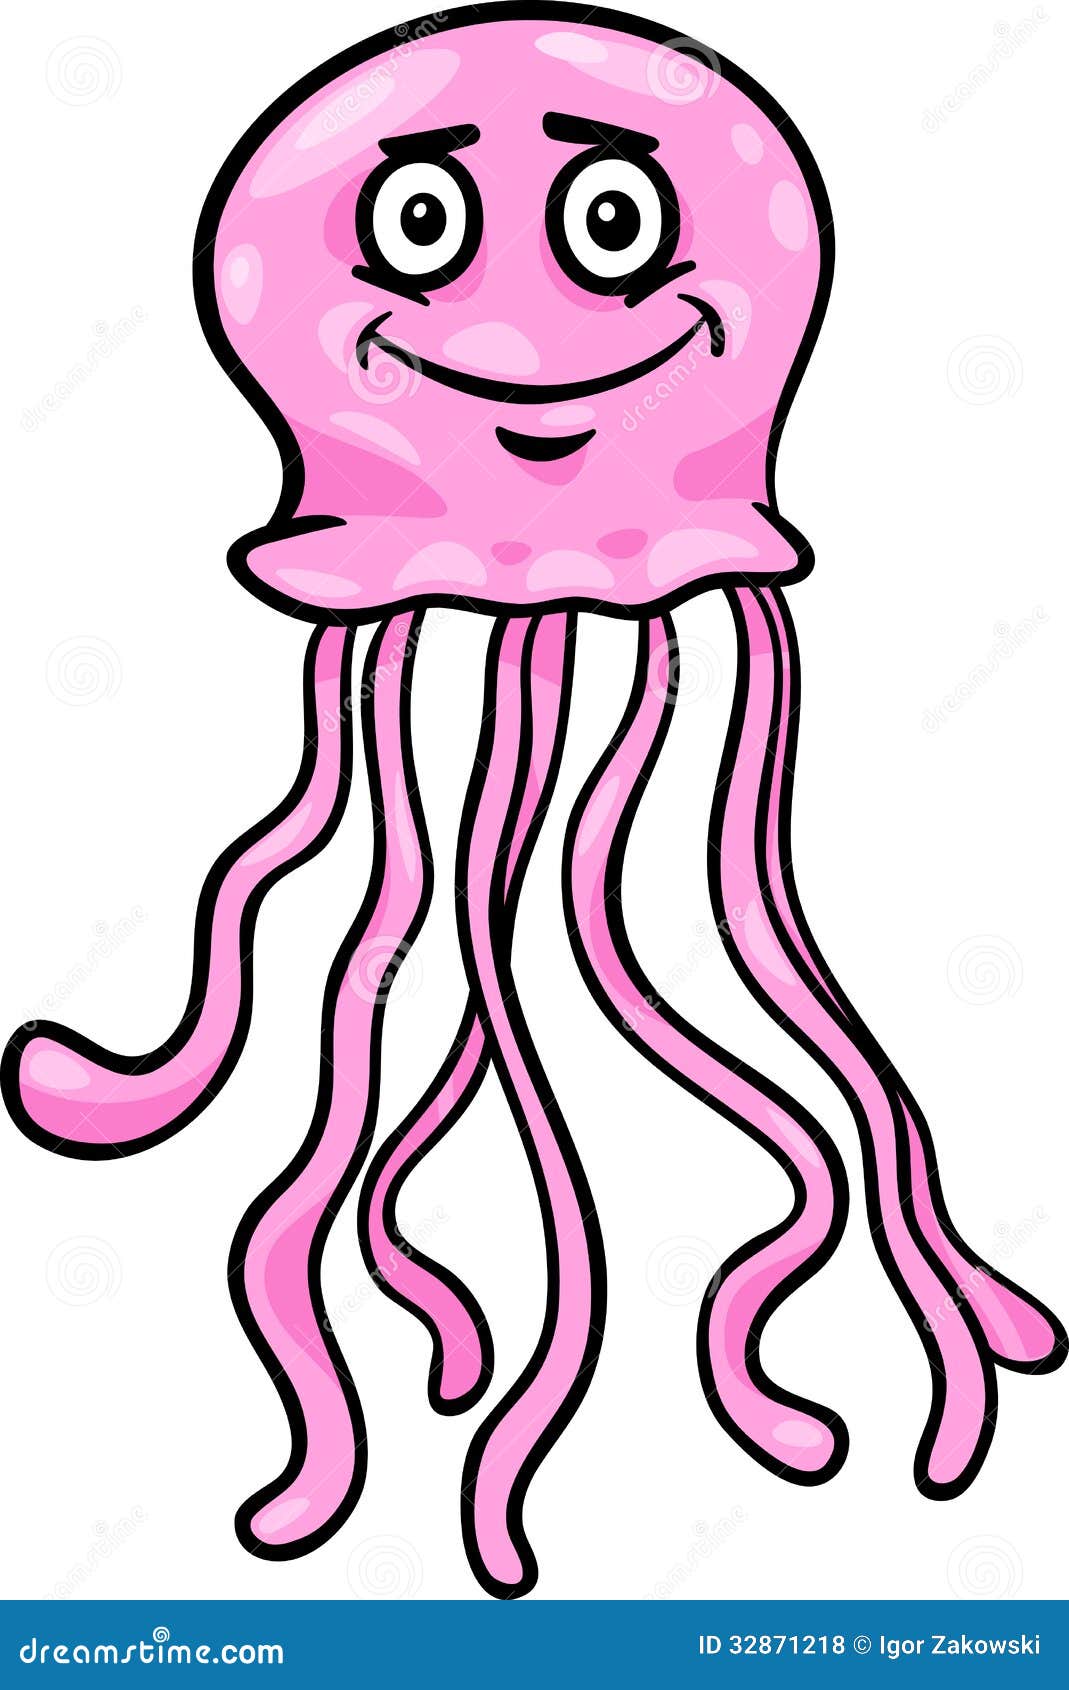 moving jellyfish clipart - photo #12